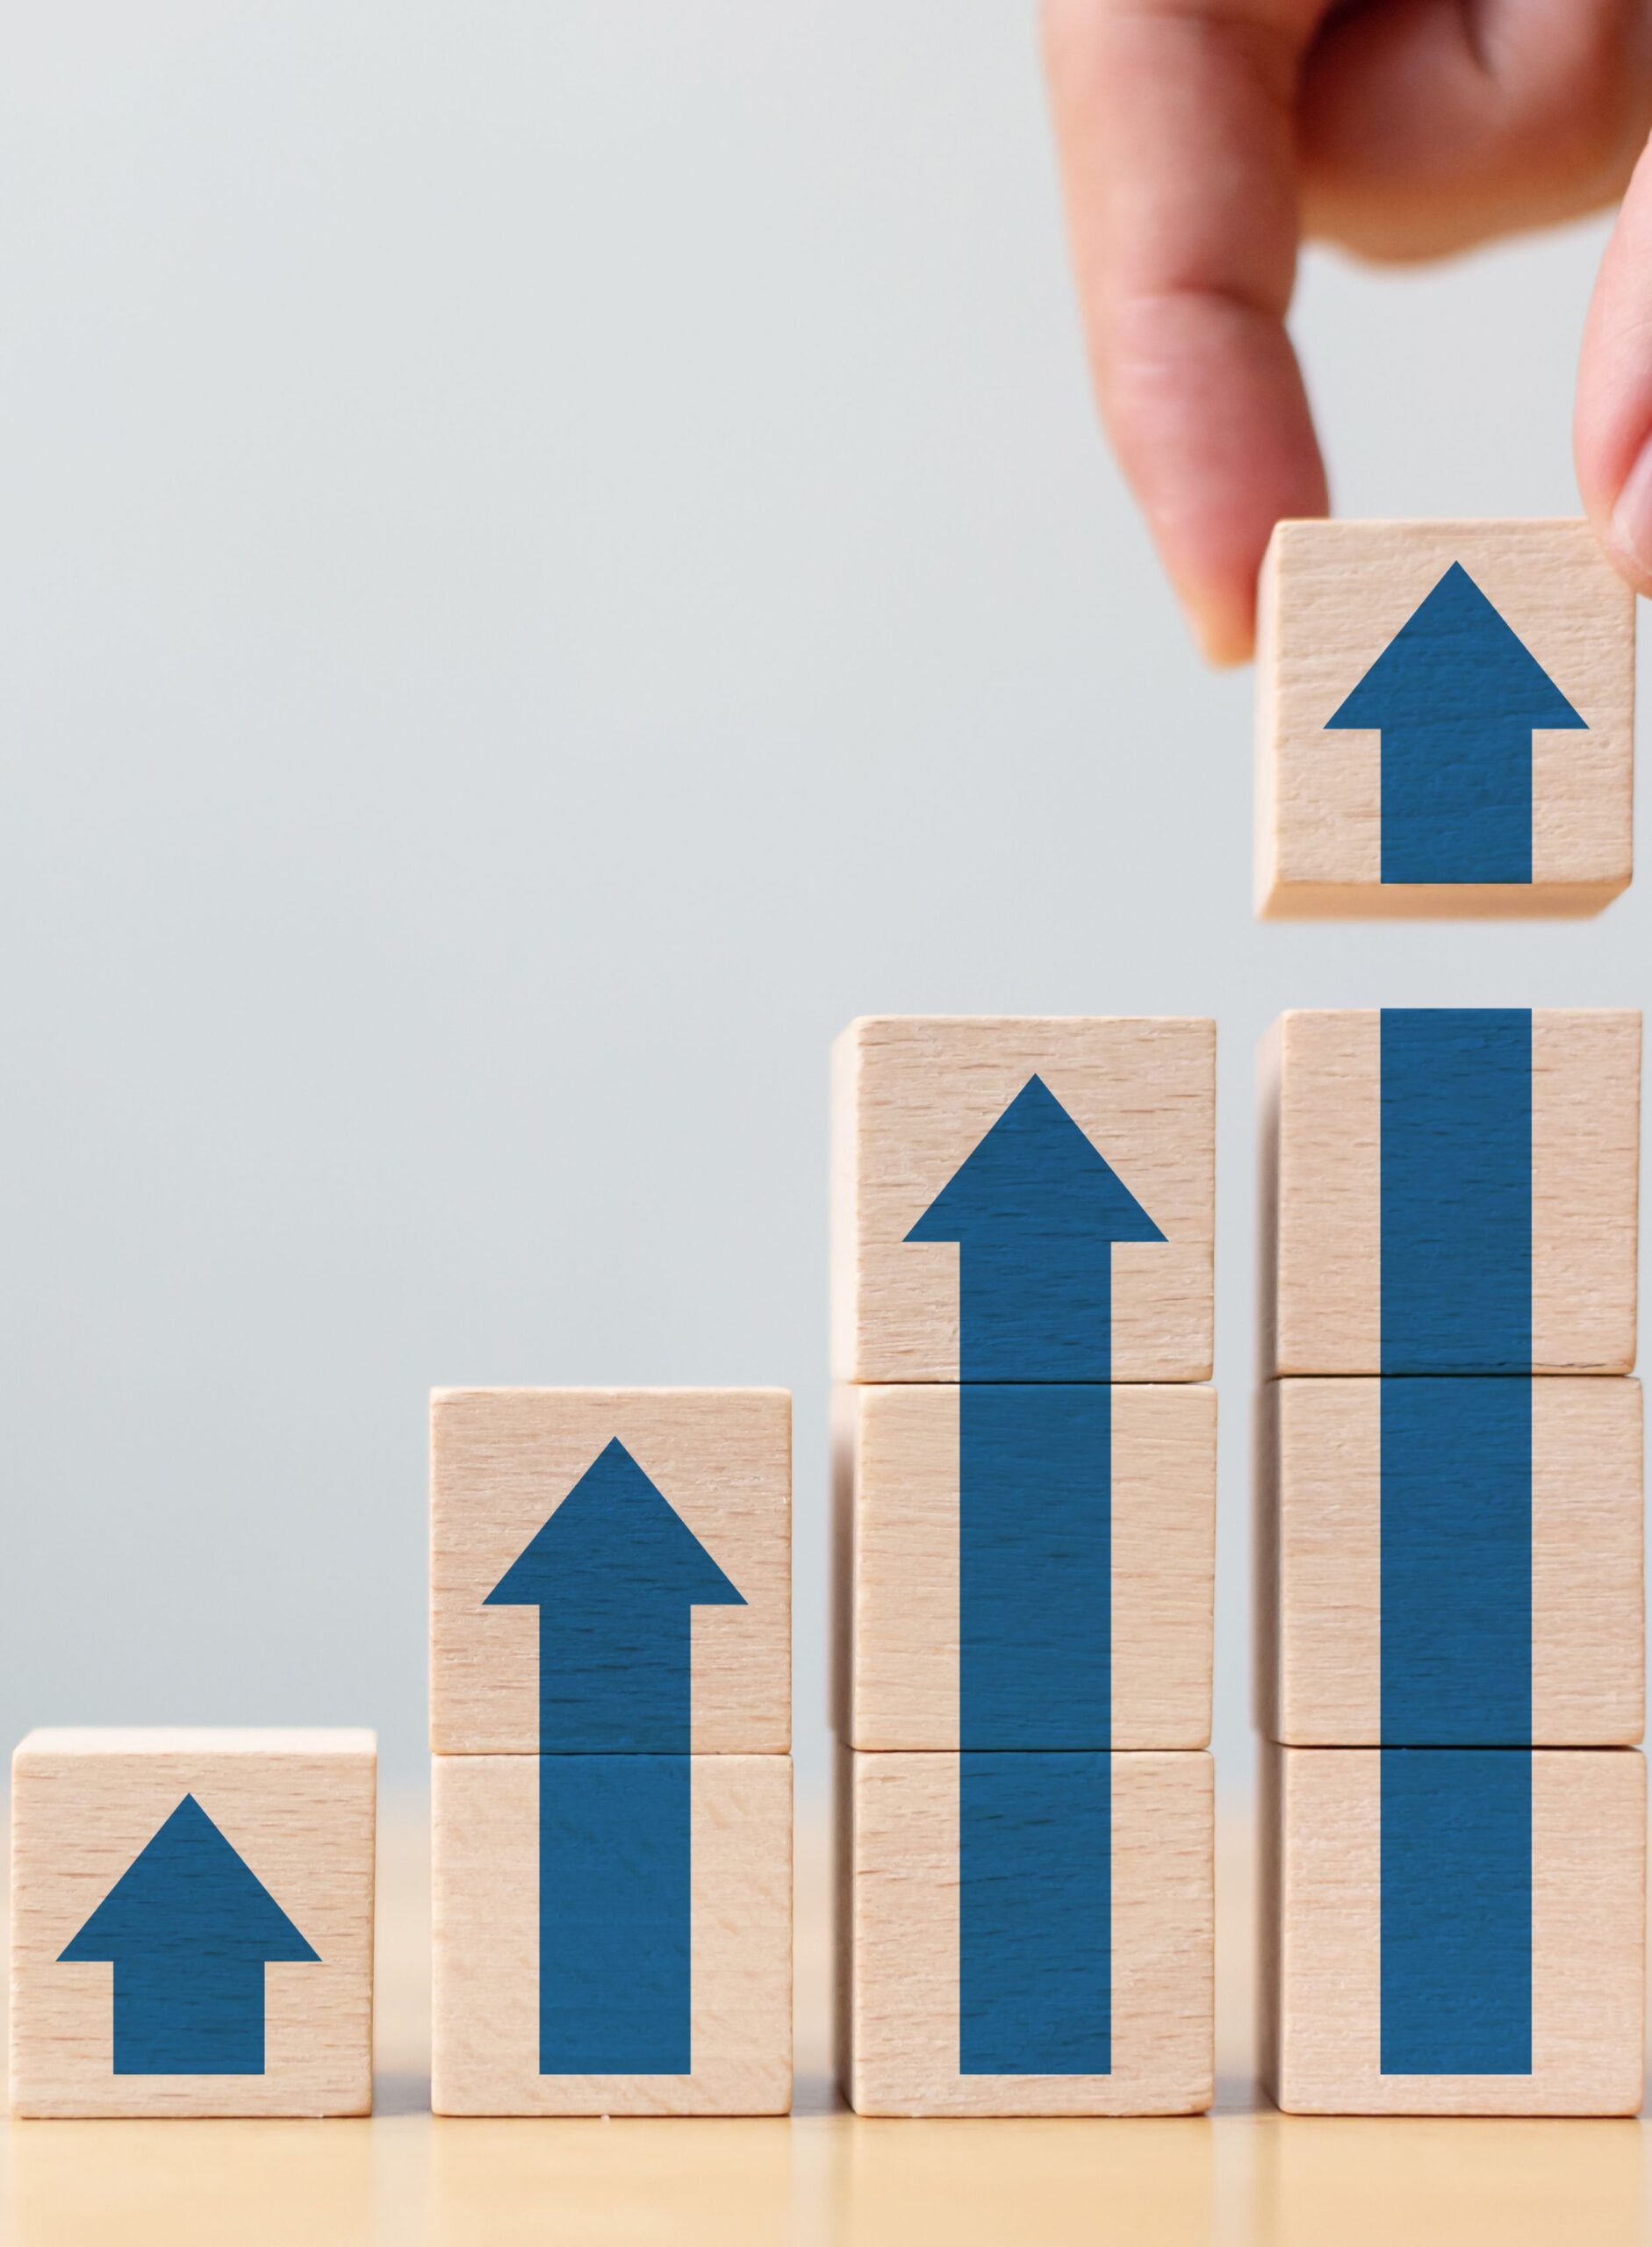 Illustration of wooden blocks forming an ascending line chart, symbolizing business growth strategies.